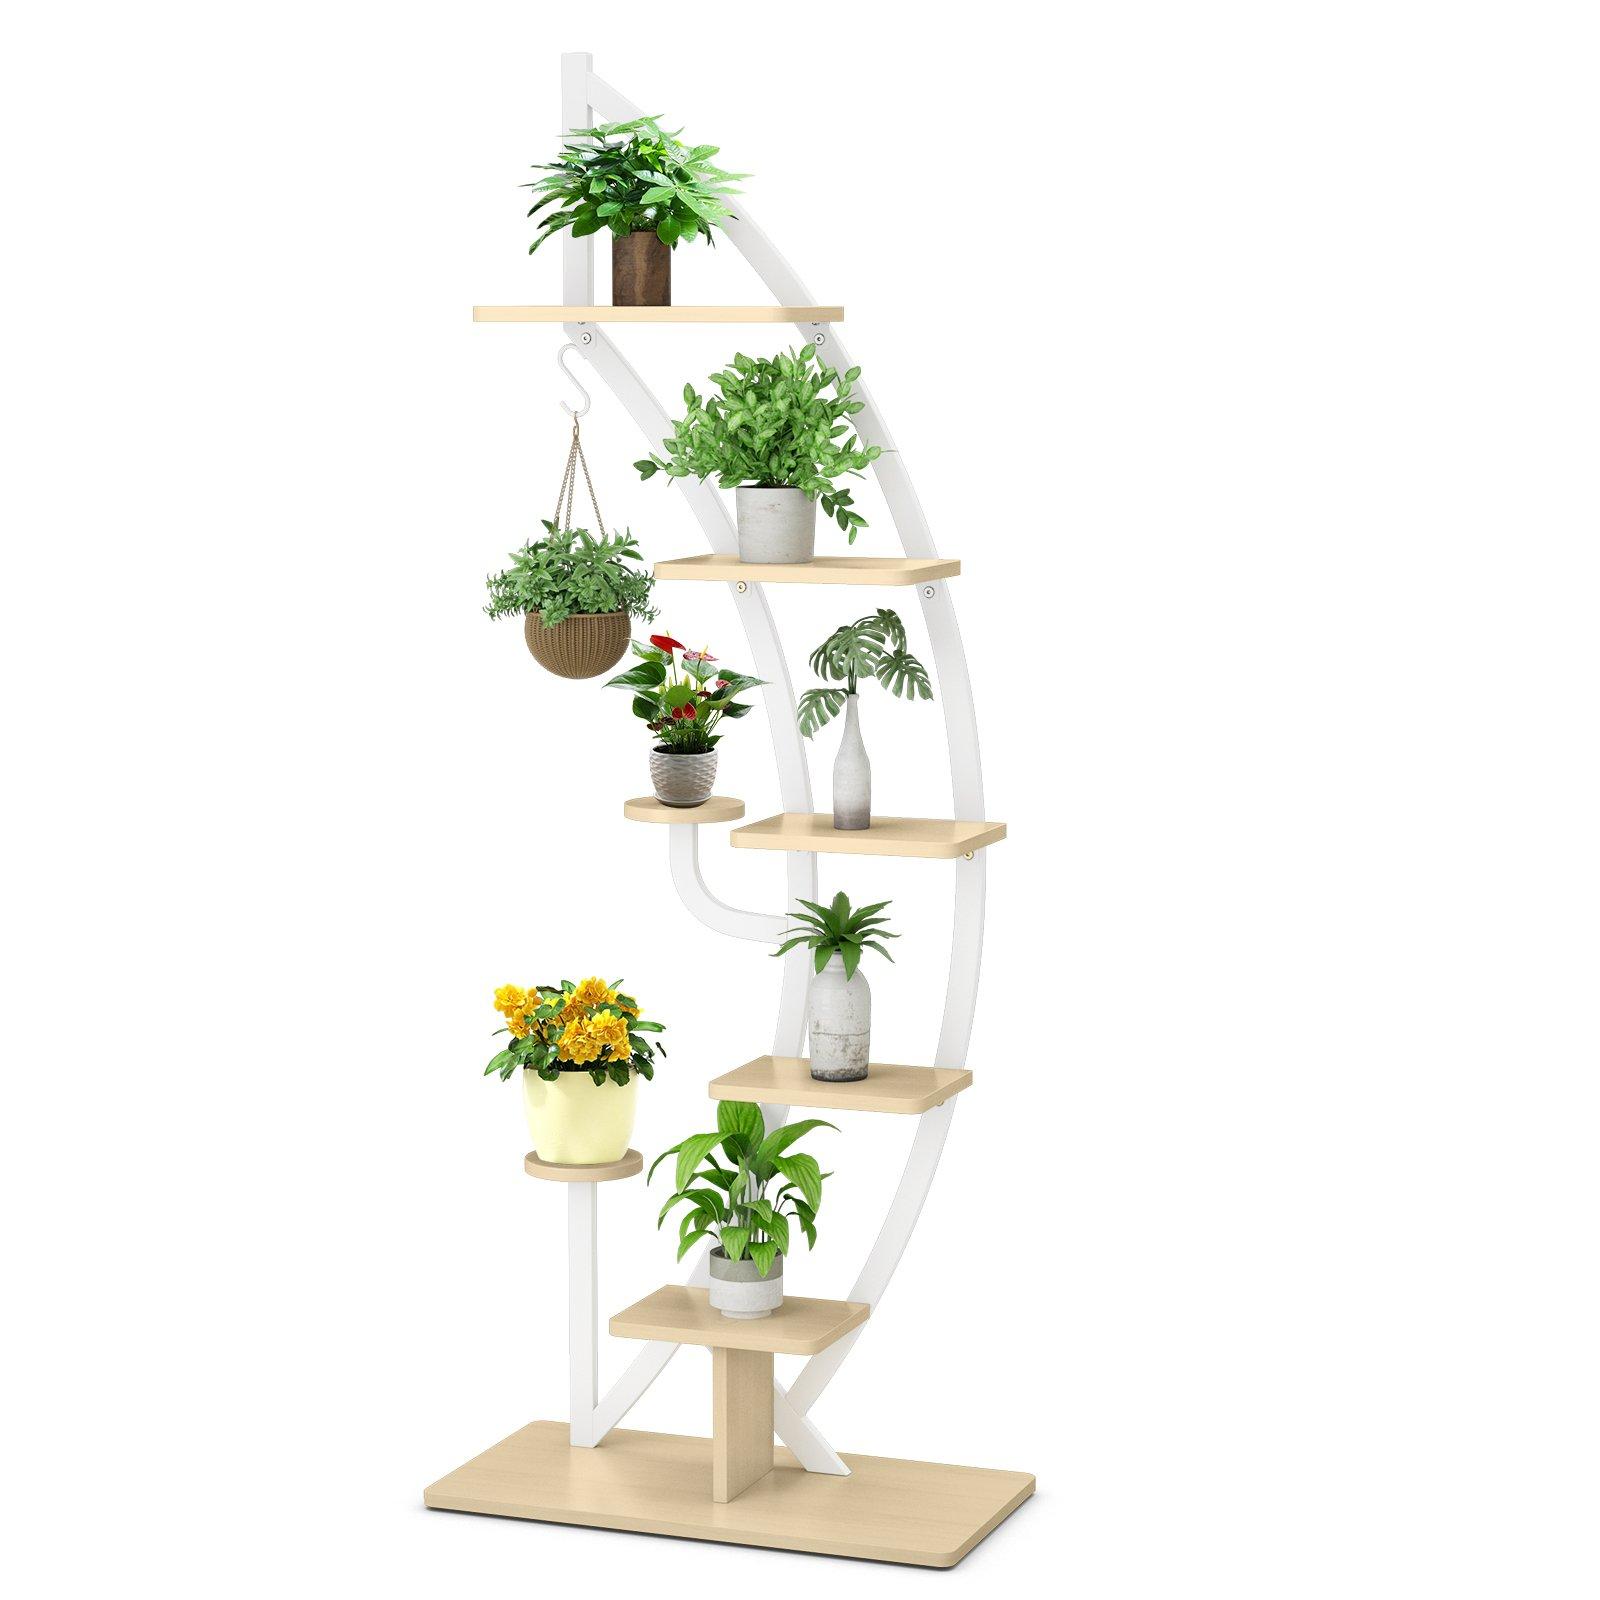 8-Tier Tall Wooden Plant Stand Rack Curved Half Moon Shape Ladder Planter Shelf W/ Top Hook